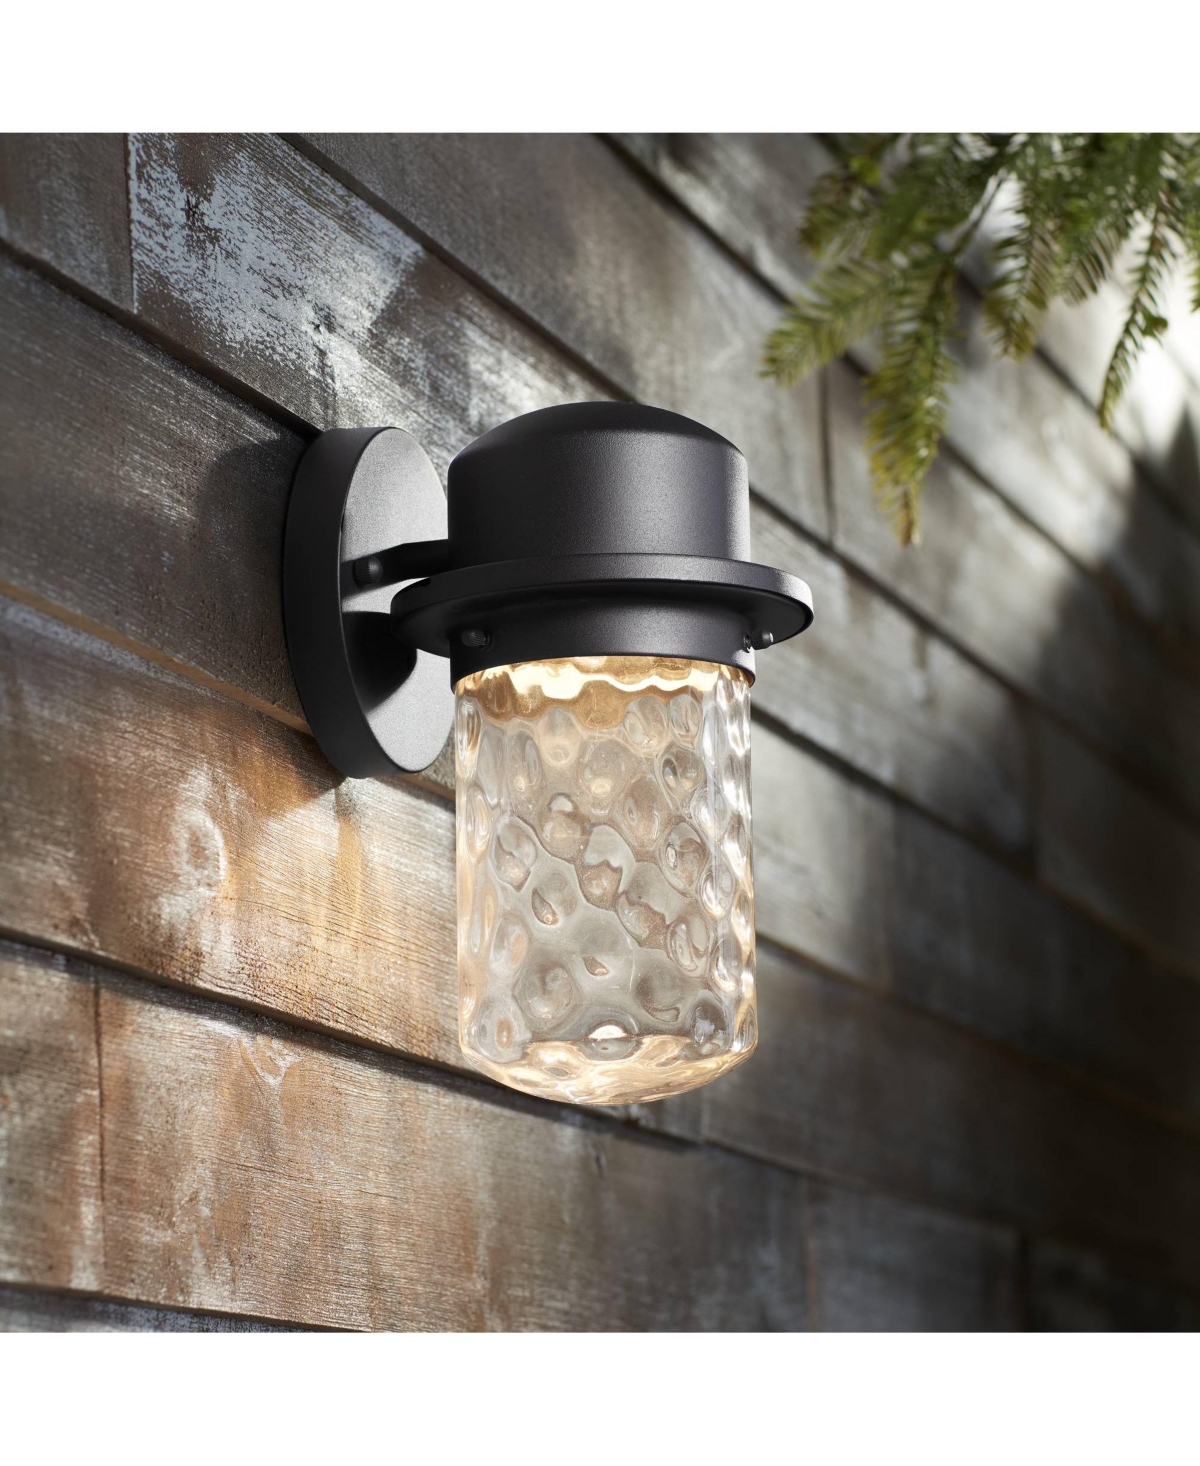 Mallow Modern Rustic Outdoor Wall Light Fixture Led Textured Black Steel 9 1/4" Clear Hammered Glass for Exterior House Porch Patio Outside Deck Garag